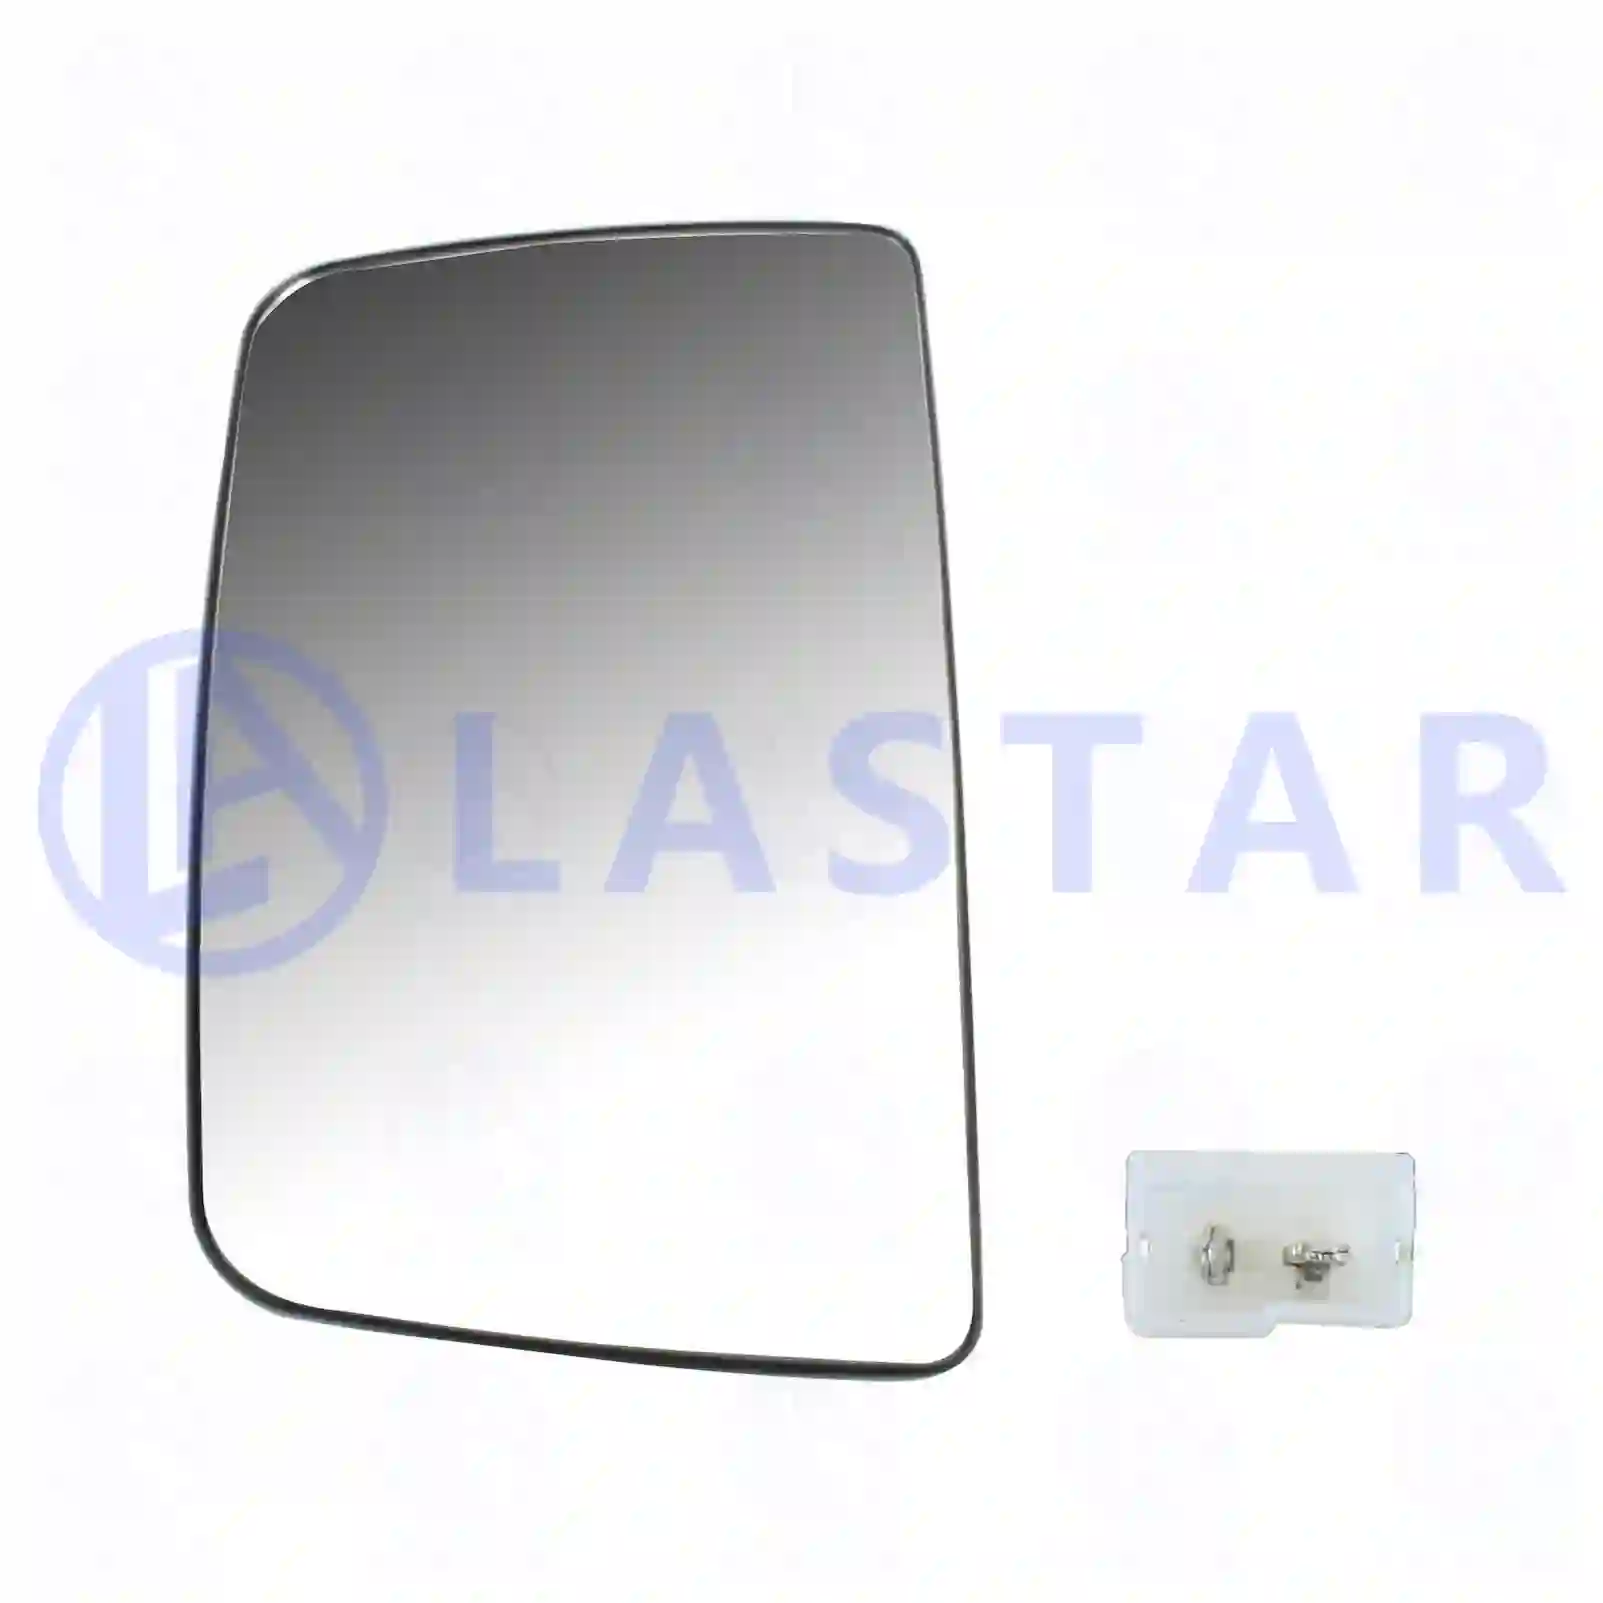 Mirror glass, main mirror, heated, 77720424, 1737933, 7420862795, 20862795, ZG60999-0008 ||  77720424 Lastar Spare Part | Truck Spare Parts, Auotomotive Spare Parts Mirror glass, main mirror, heated, 77720424, 1737933, 7420862795, 20862795, ZG60999-0008 ||  77720424 Lastar Spare Part | Truck Spare Parts, Auotomotive Spare Parts